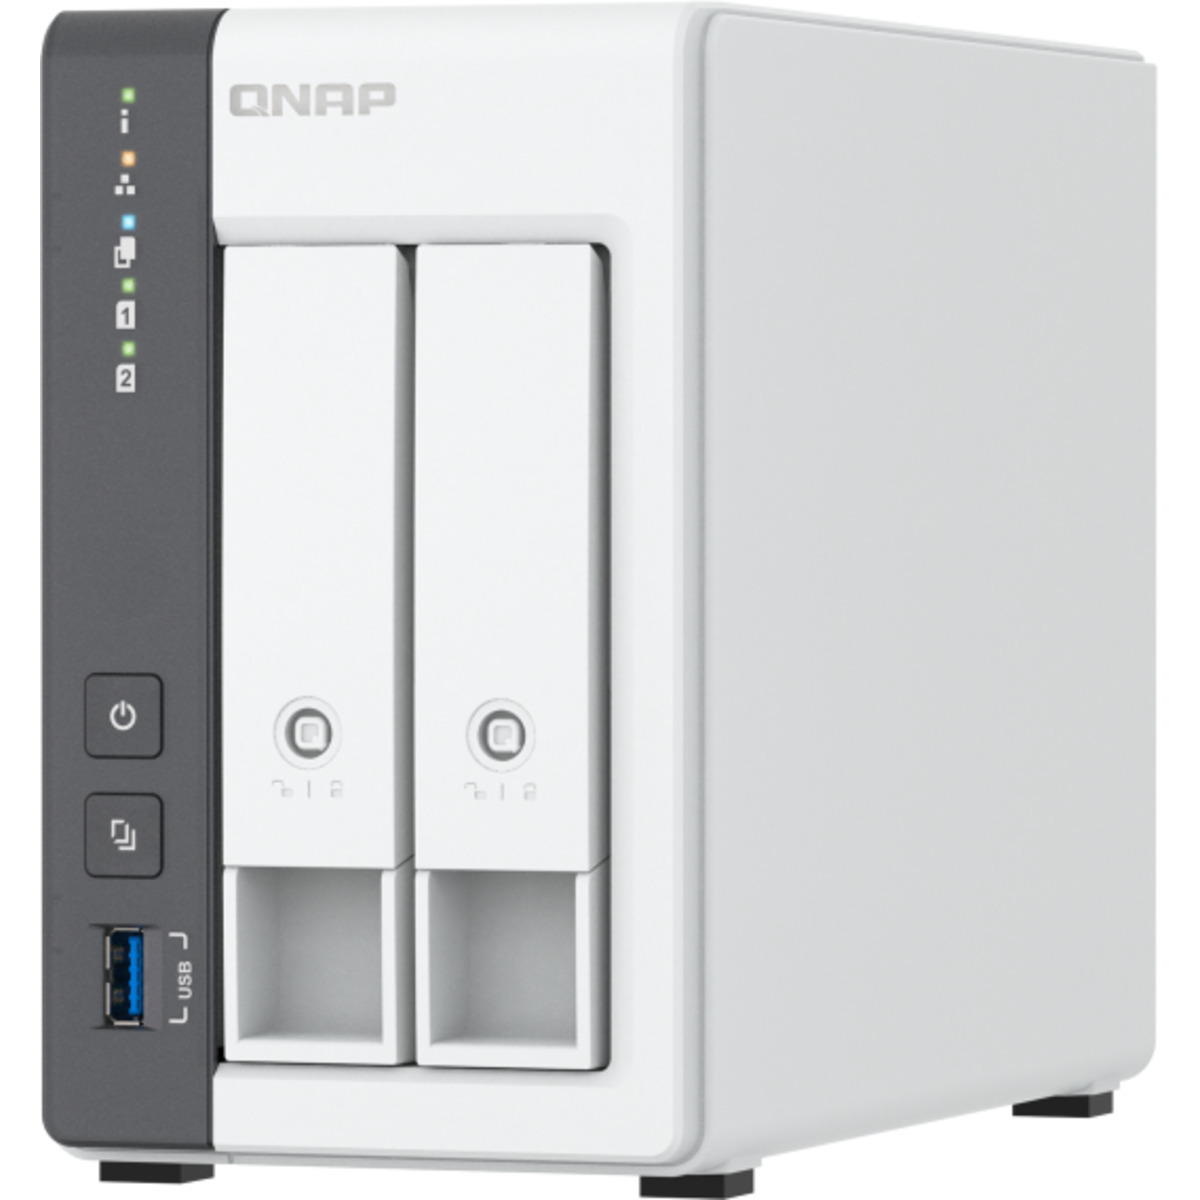 QNAP TS-216G 24tb 2-Bay Desktop Personal / Basic Home / Small Office NAS - Network Attached Storage Device 2x12tb Seagate IronWolf Pro ST12000NT001 3.5 7200rpm SATA 6Gb/s HDD NAS Class Drives Installed - Burn-In Tested - ON SALE TS-216G